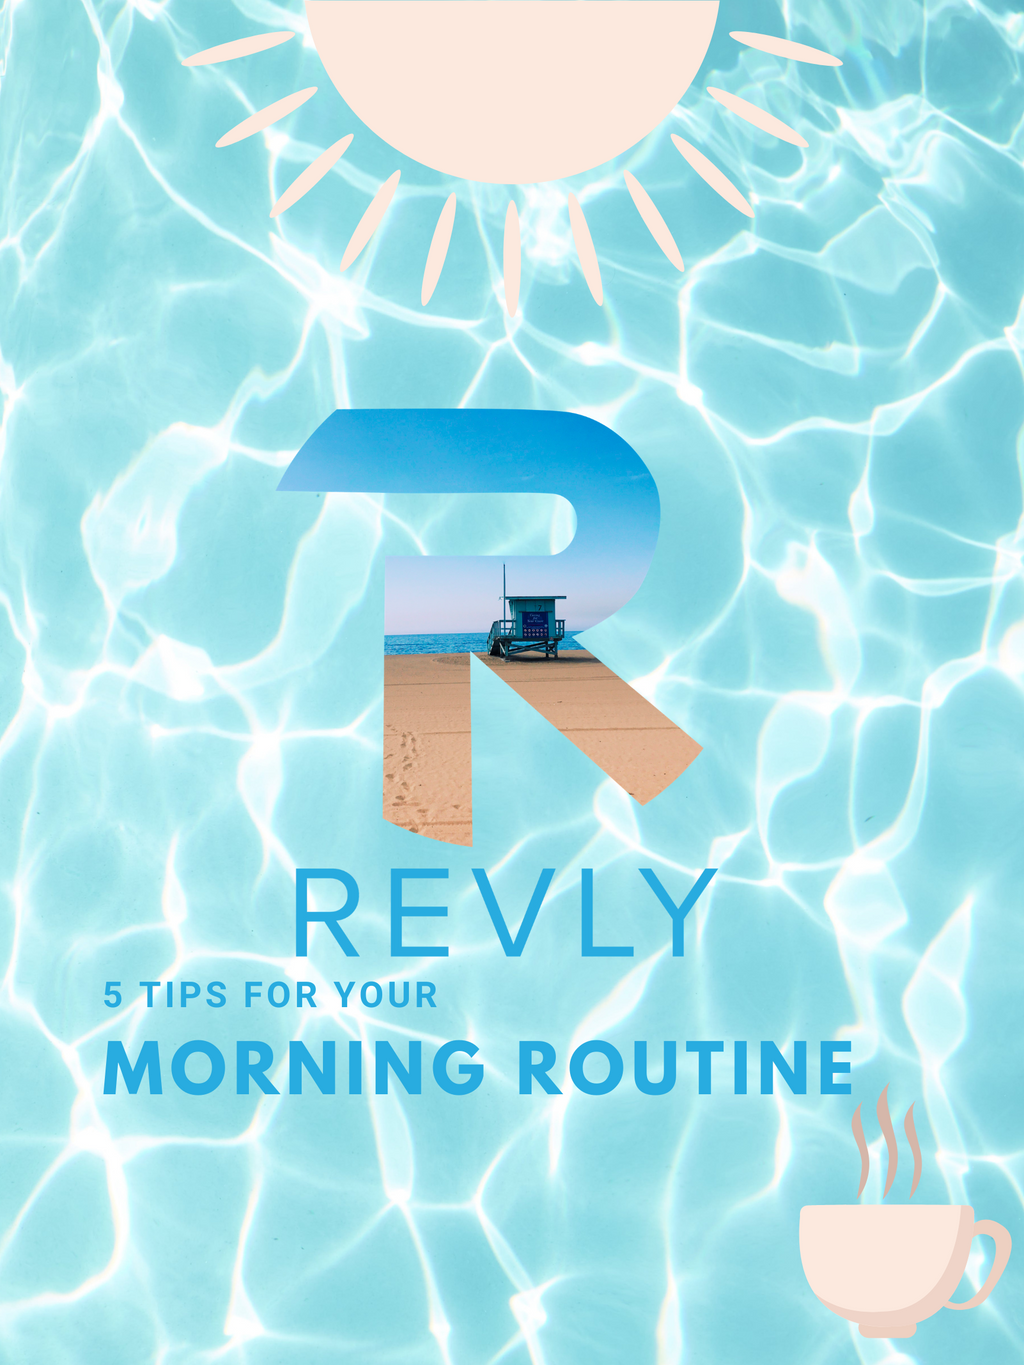 5 Things to Implement into Your Morning Routine